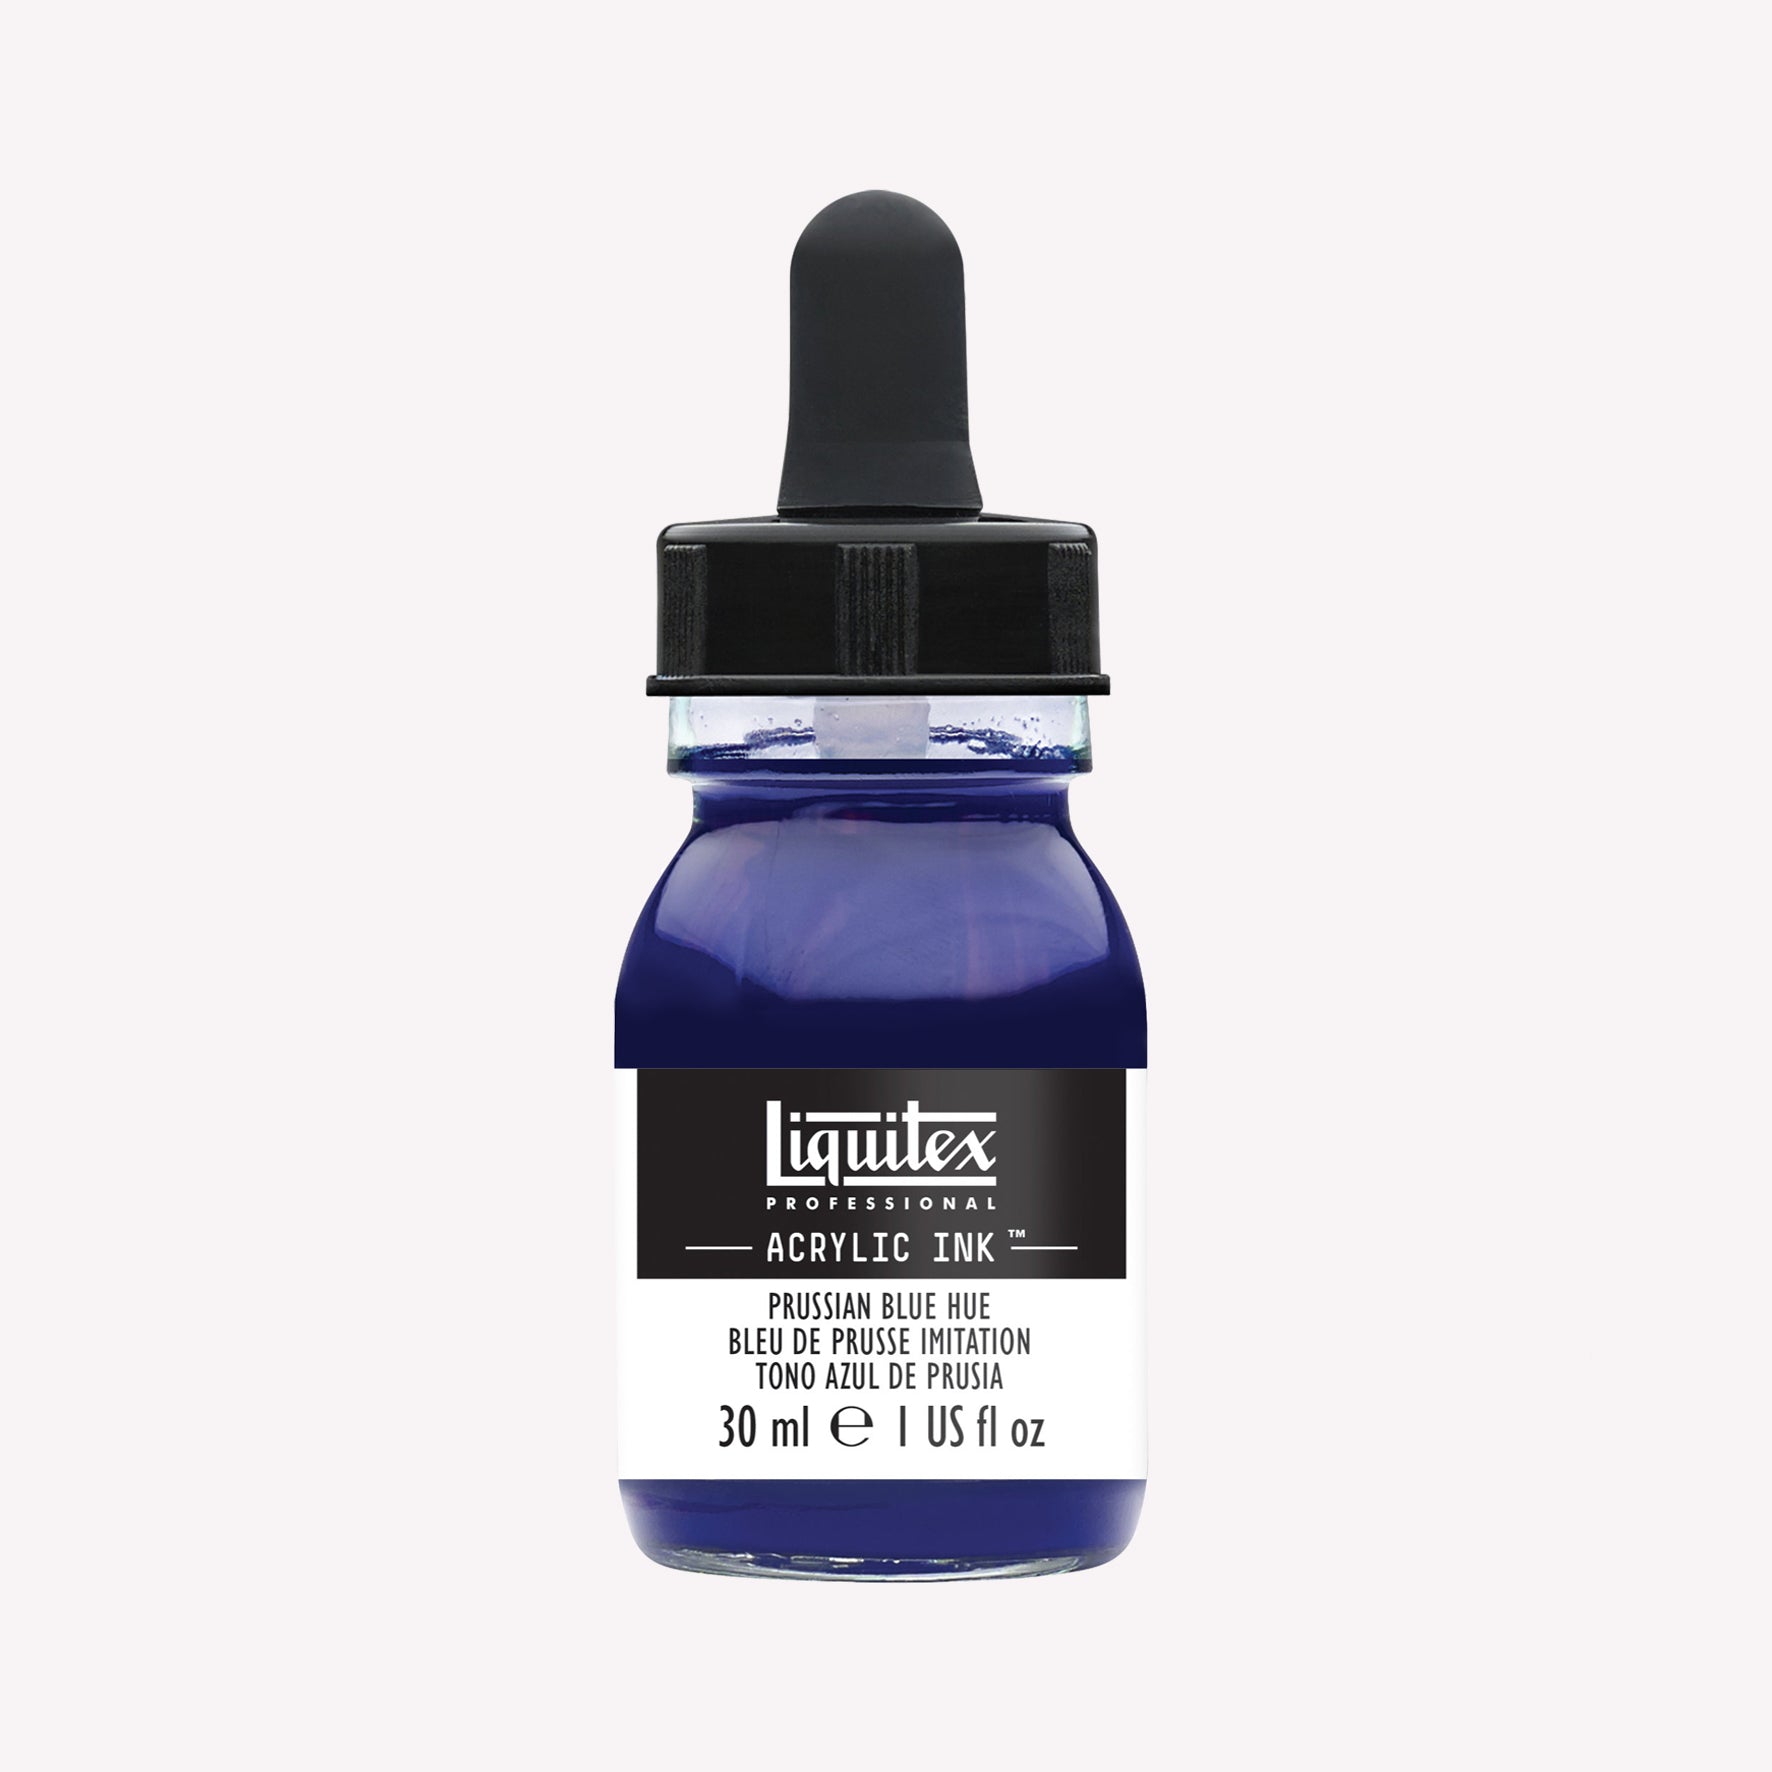 A 30ml glass jar of highly pigmented, artist-quality acrylic ink in the shade Prussian Blue with a pipette lid. Made by Liquitex. 